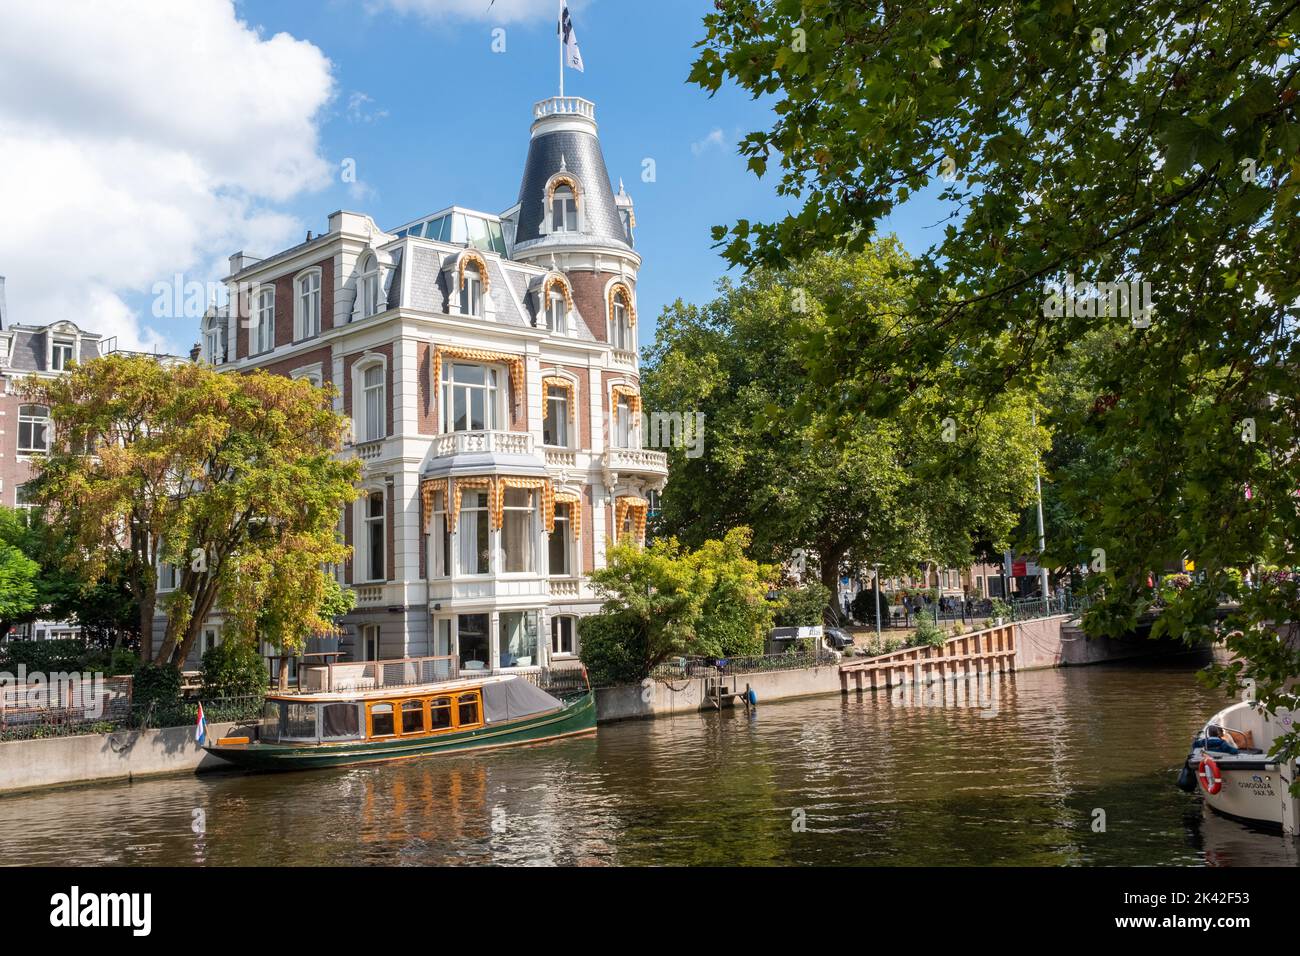 Atlas Tax Law Firm - Picturesque building near Rijksmuseum, Amsterdam, The Netherlands Stock Photo